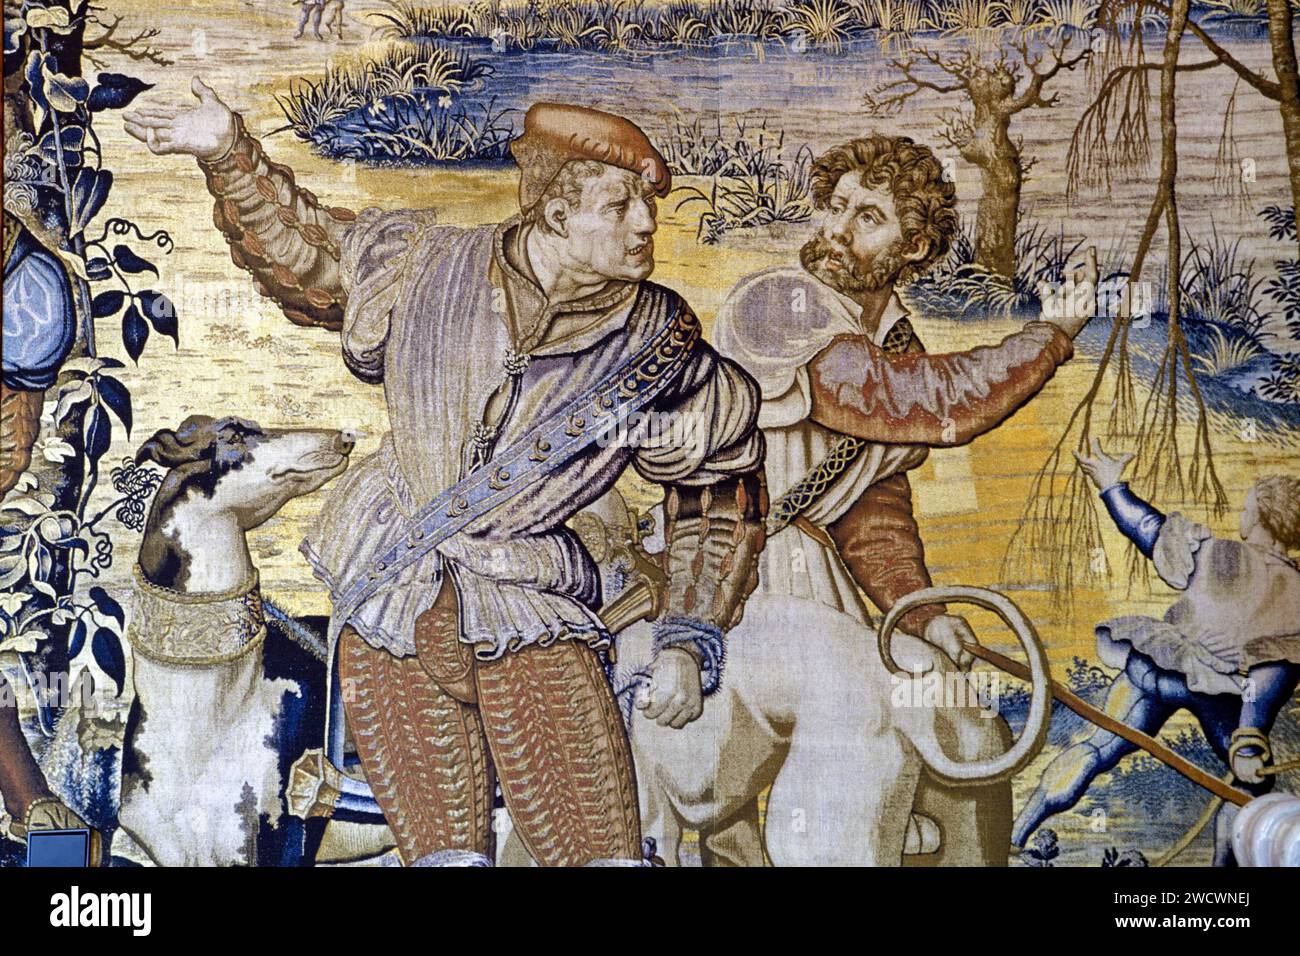 Germany, Baden Wurttemberg, Lake Constance (Bodensee), Meersburg, Neues Schloss (New castle),Schoßmuseum Meersburg (castel museum), prince bishop appartement, the tapestry series of the Chasses de Maximilien Stock Photo